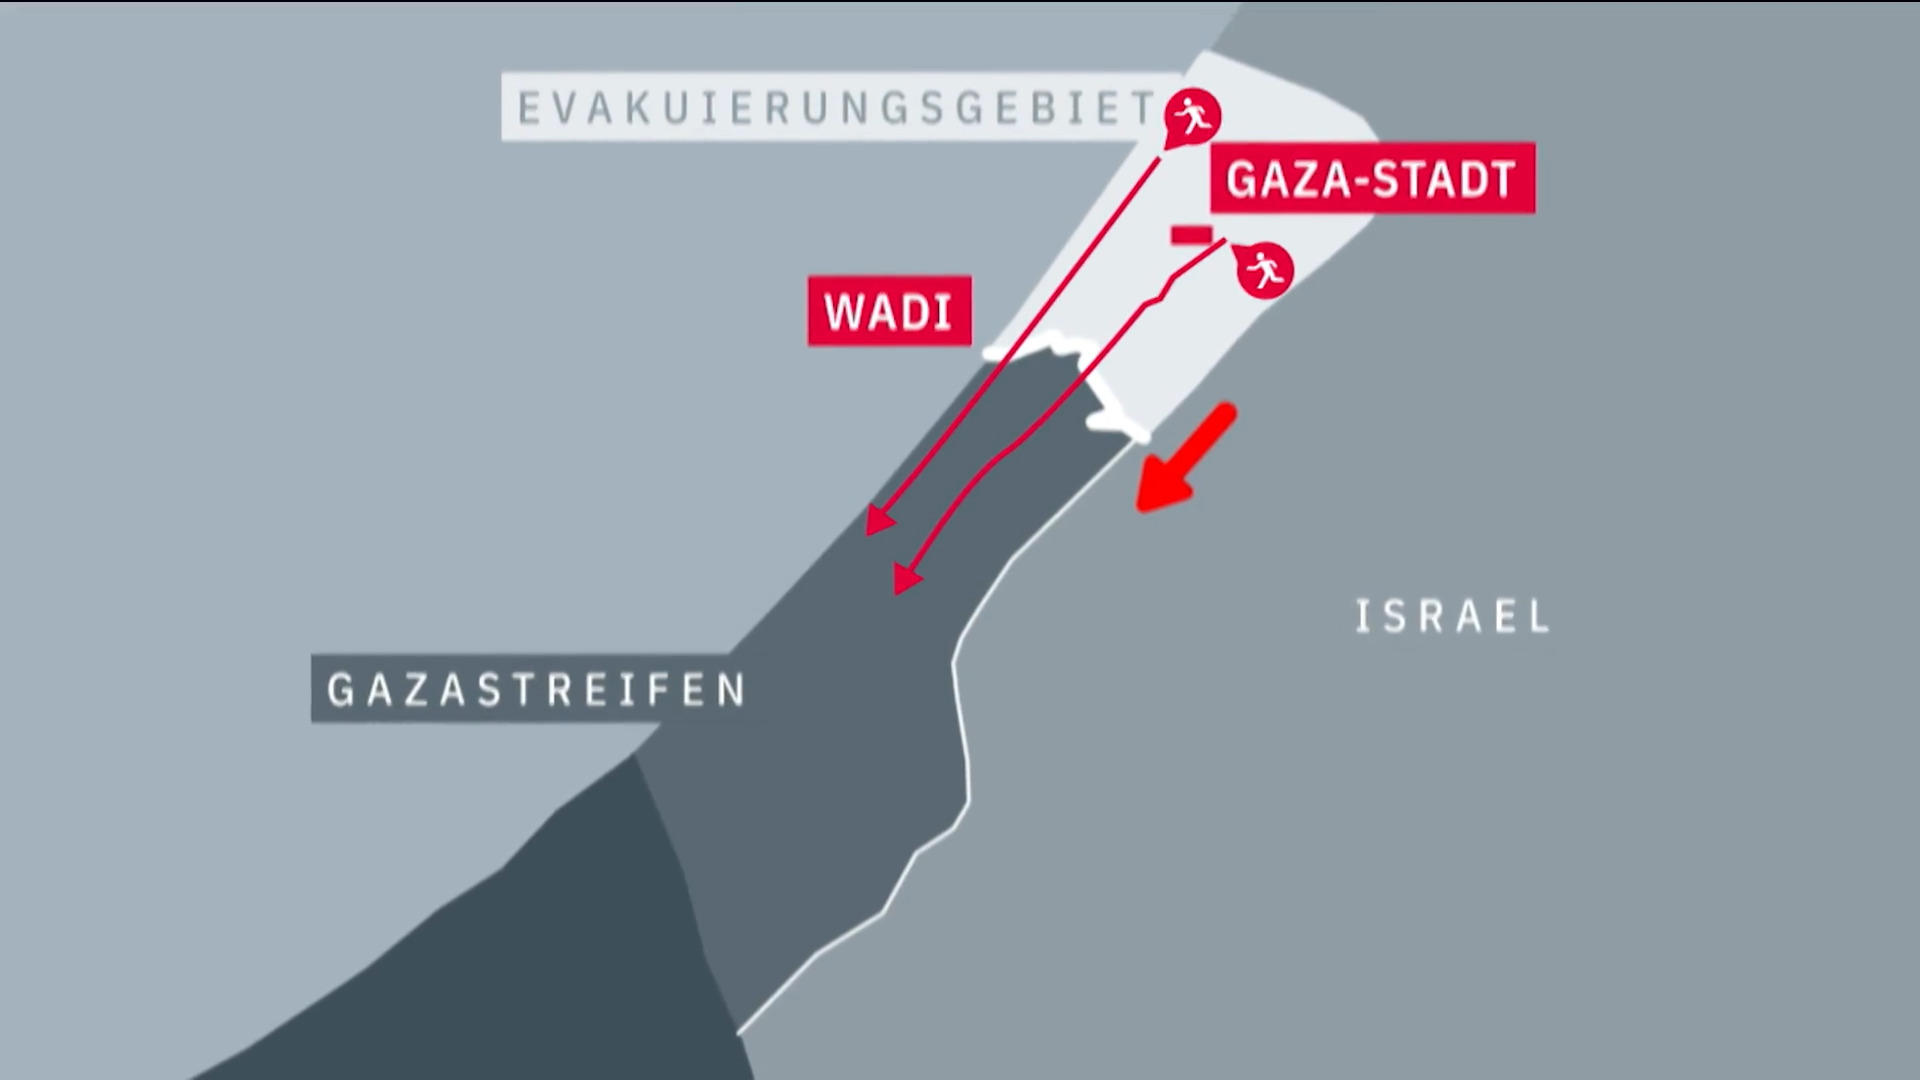 The people of Gaza should leave the north shortly before an Israeli ground offensive